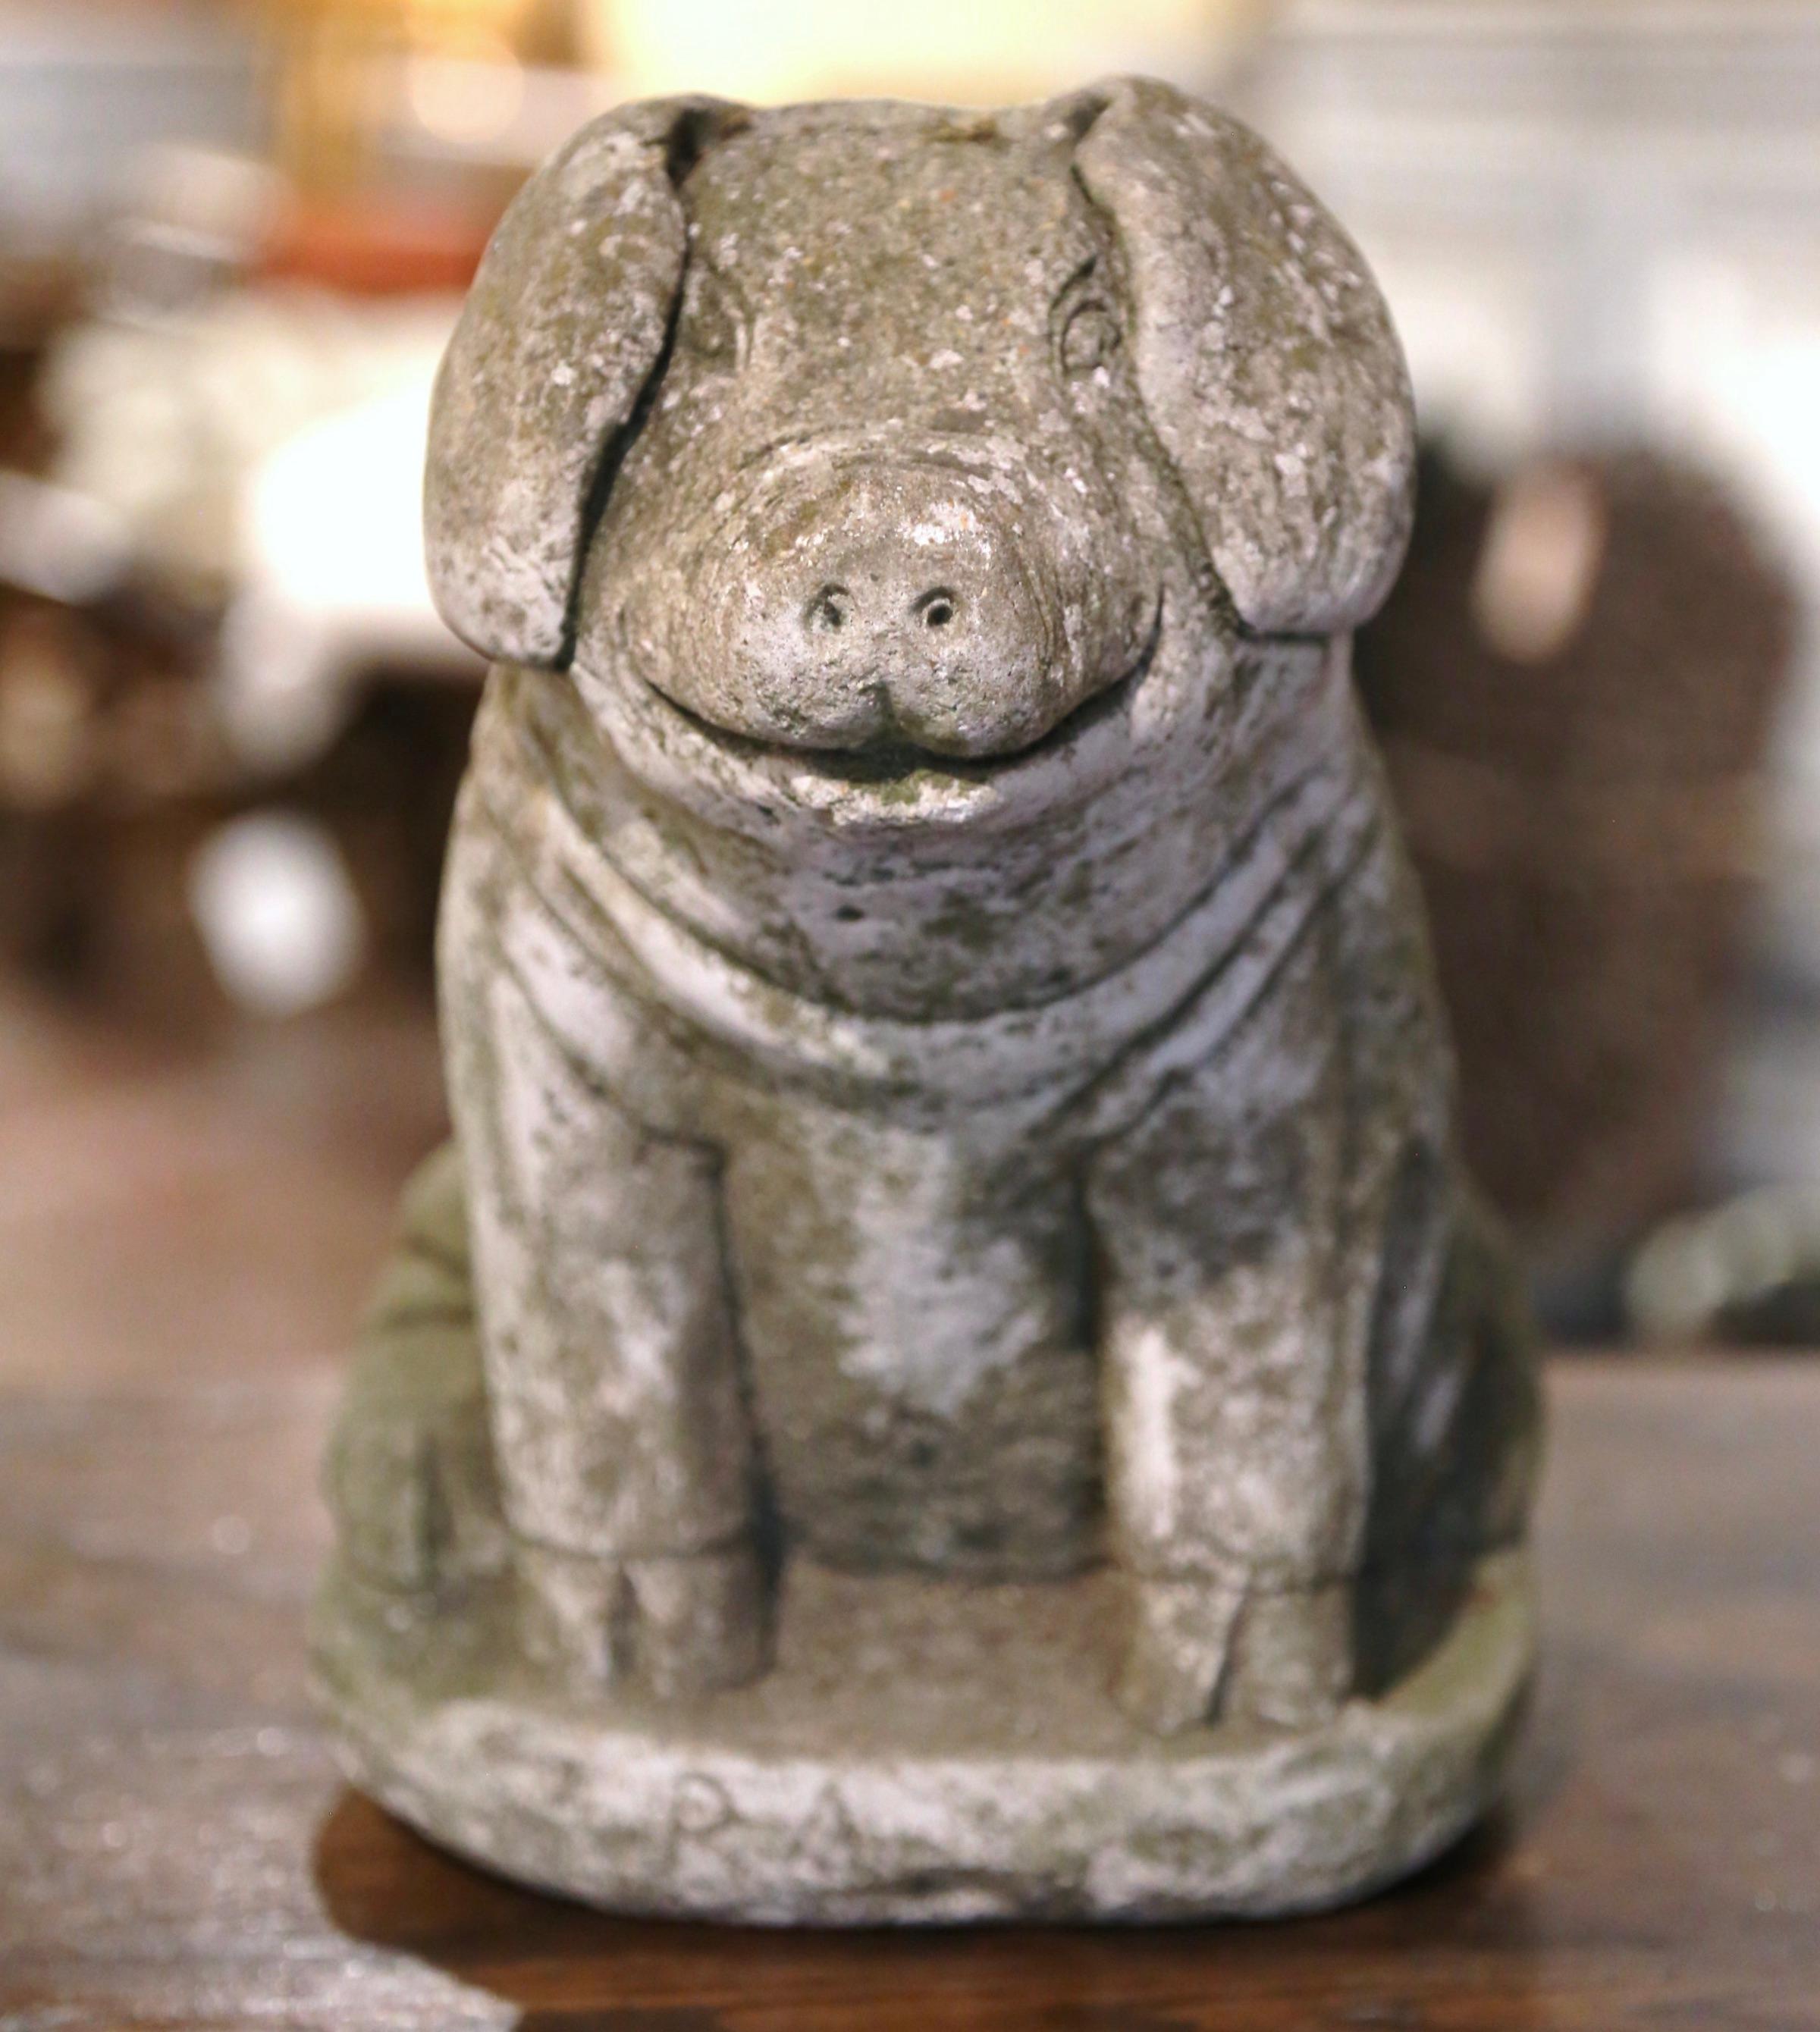 Decorate a kitchen counter or patio with this antique stone pig sculpture. Crafted in France circa 1890 and carved of concrete, the sculpture features a smiling pig sited on his back legs on a rocky oval base. The cheerful pig composition is in